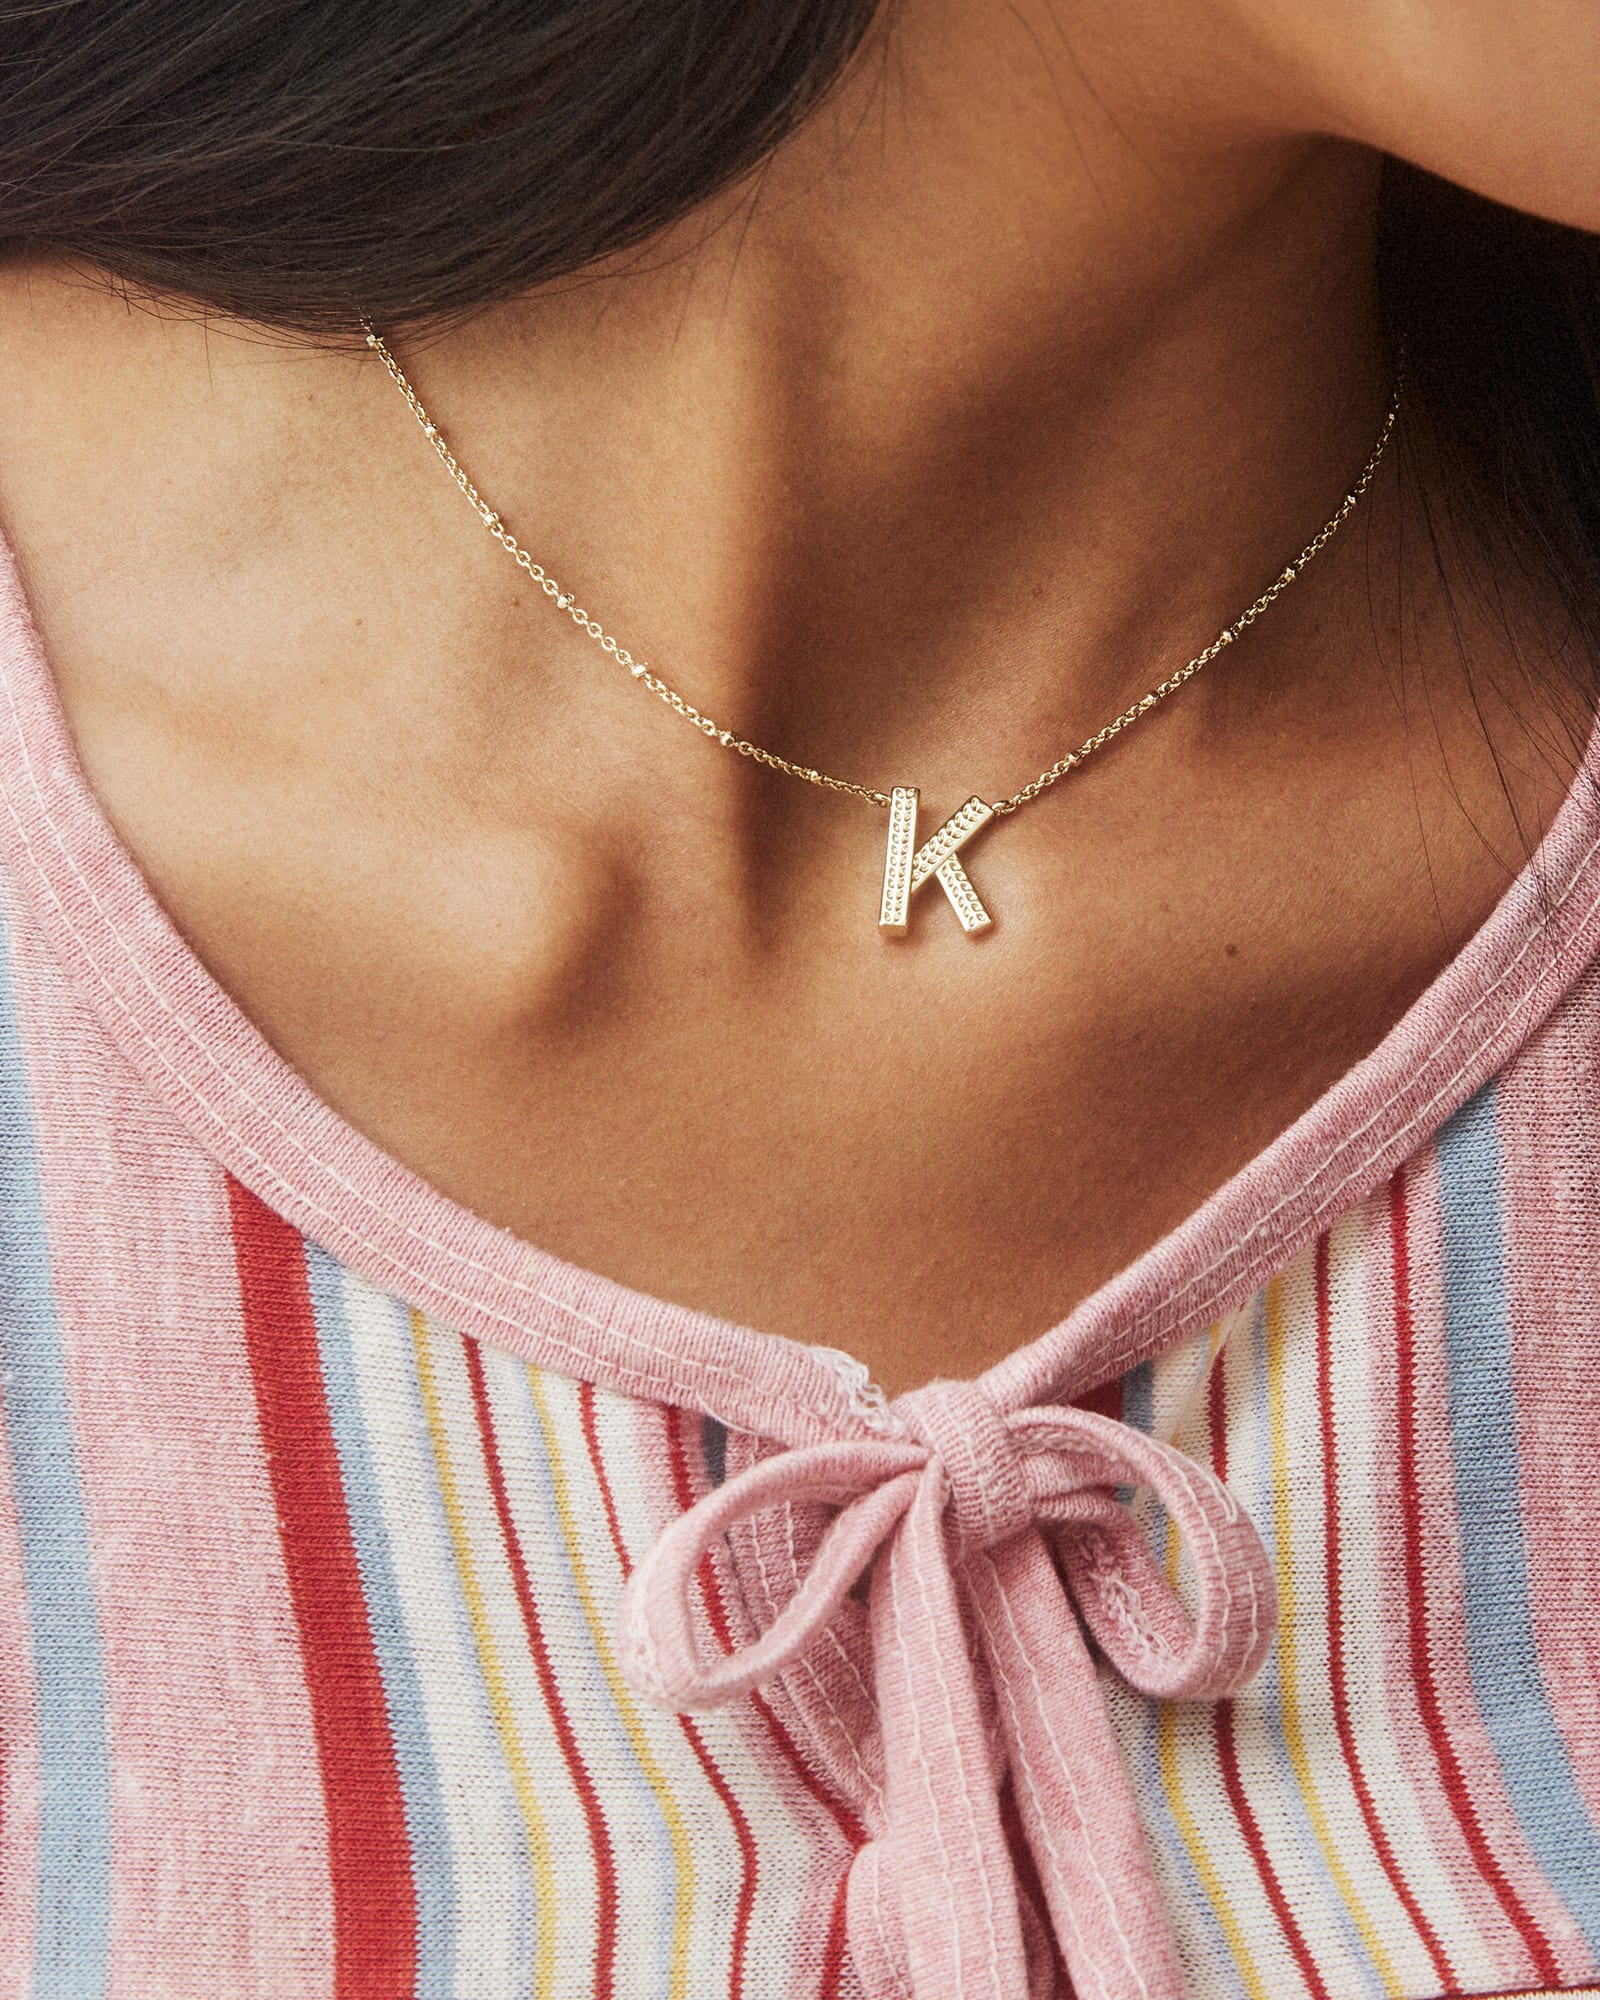 K Necklace / Gold Initial Necklace | Linjer Jewelry